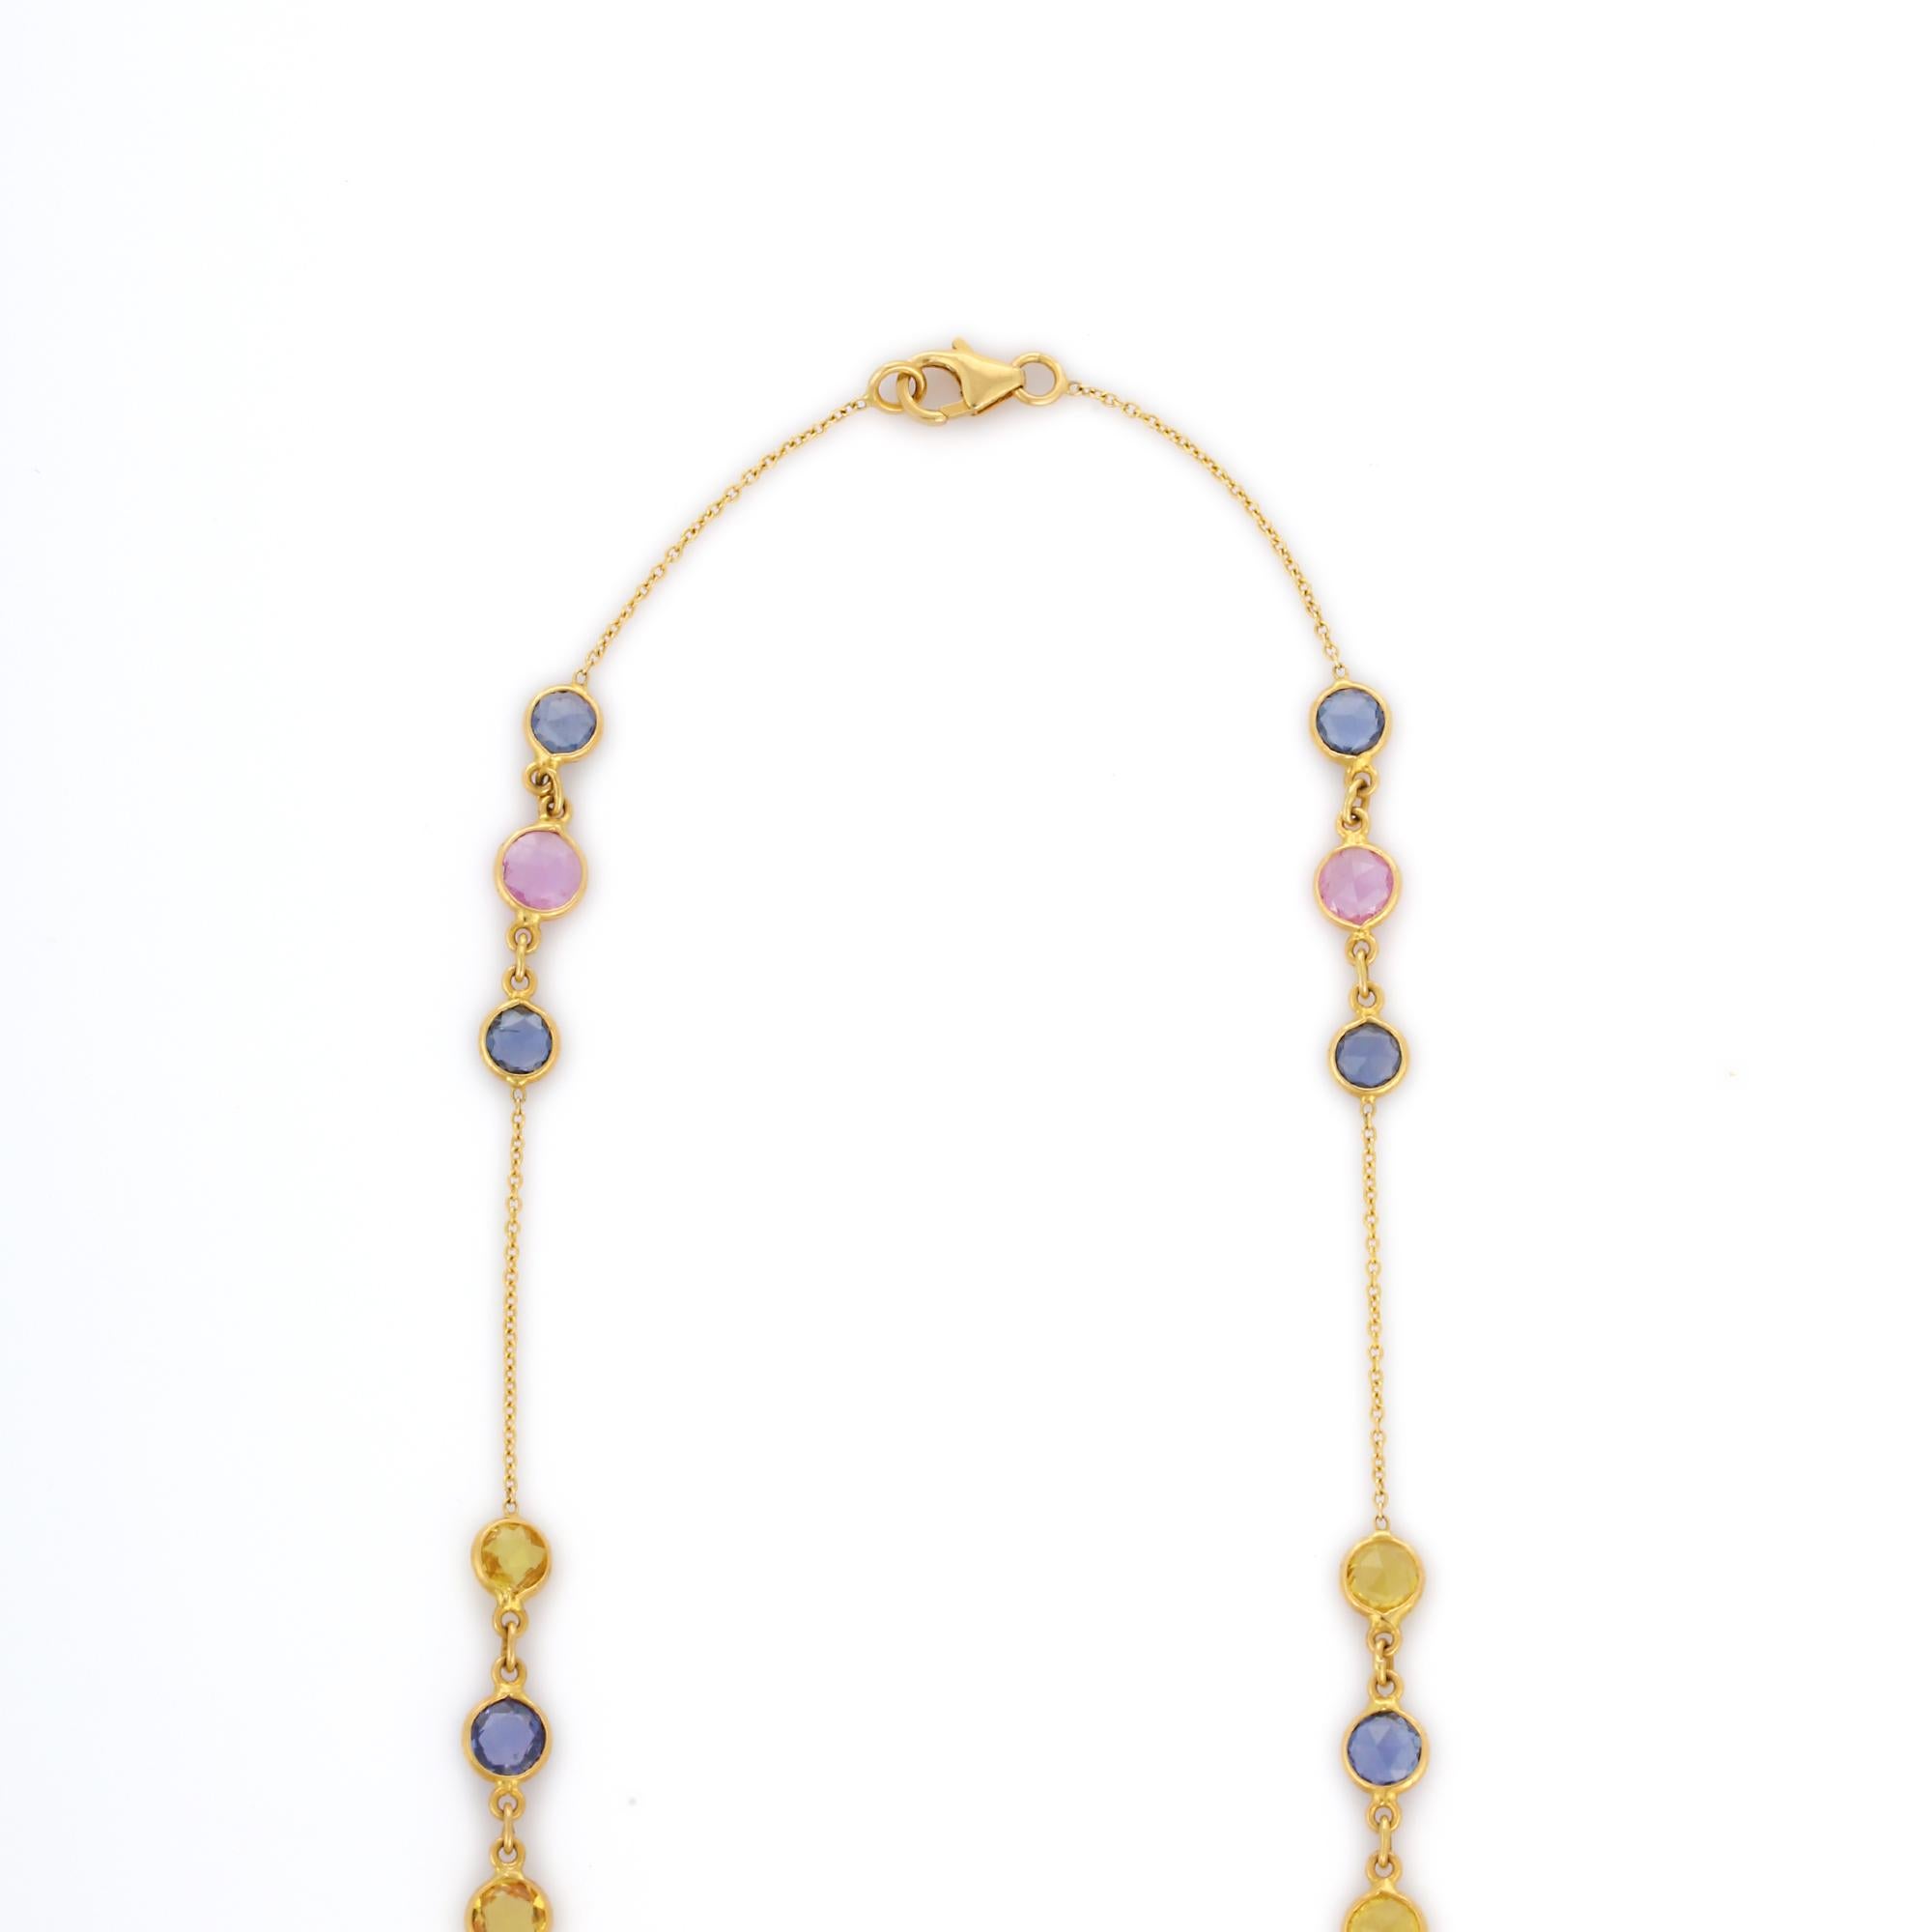 Multi Sapphire Chain Necklace Enhancer in 18K Gold studded with round cut multi sapphire gemstones.
Accessorize your look with this elegant multi sapphire chain necklace enhancer. This stunning piece of jewelry instantly elevates a casual look or